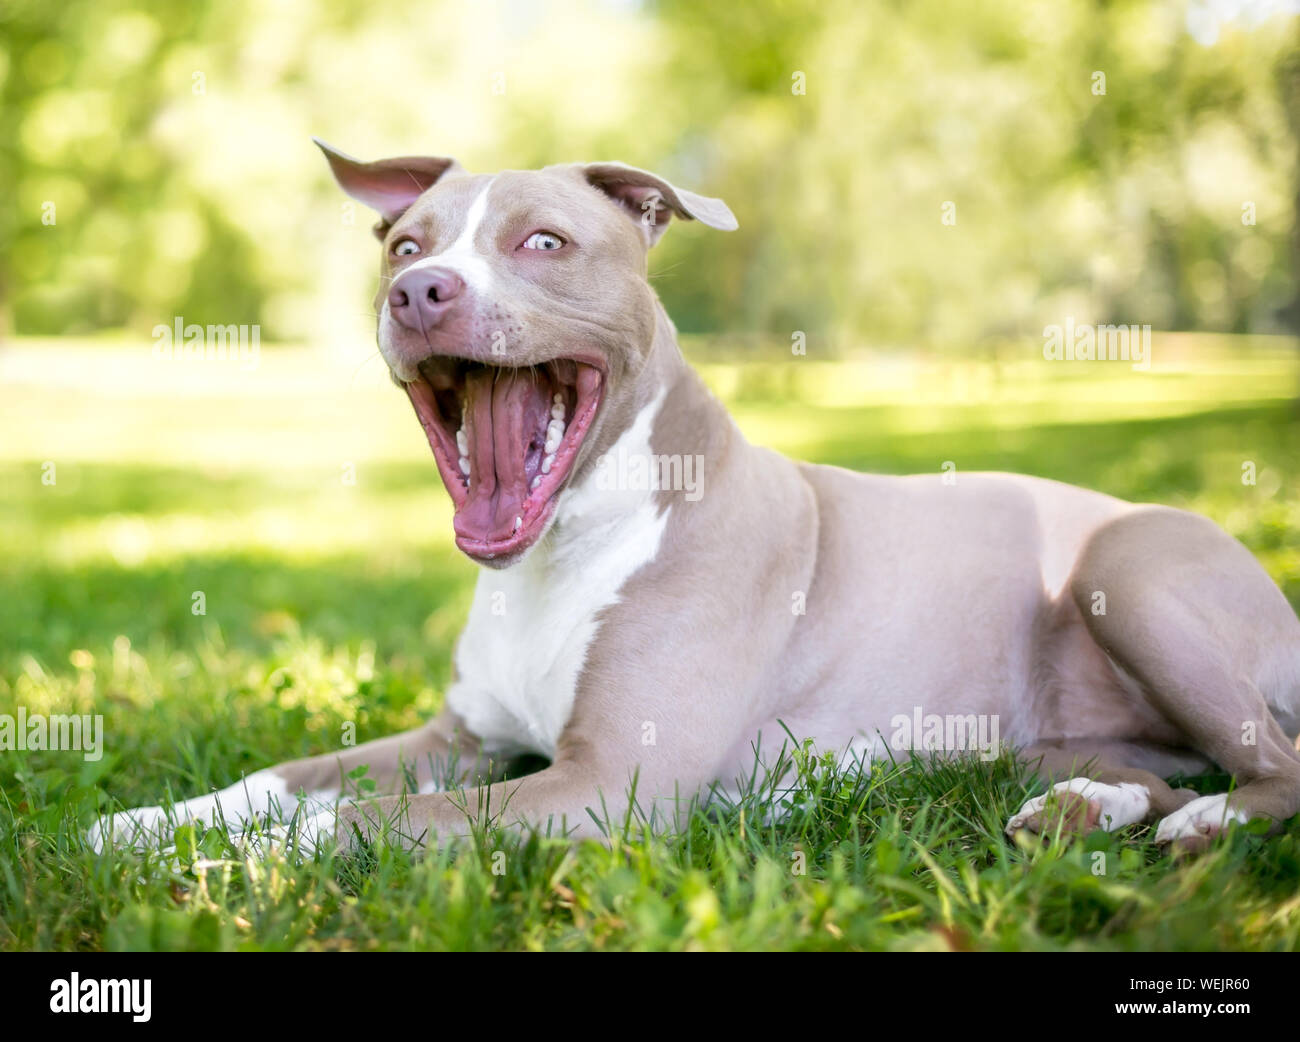 A tan and white Pit Bull Terrier mixed breed dog lying in the grass with a happy expression Stock Photo